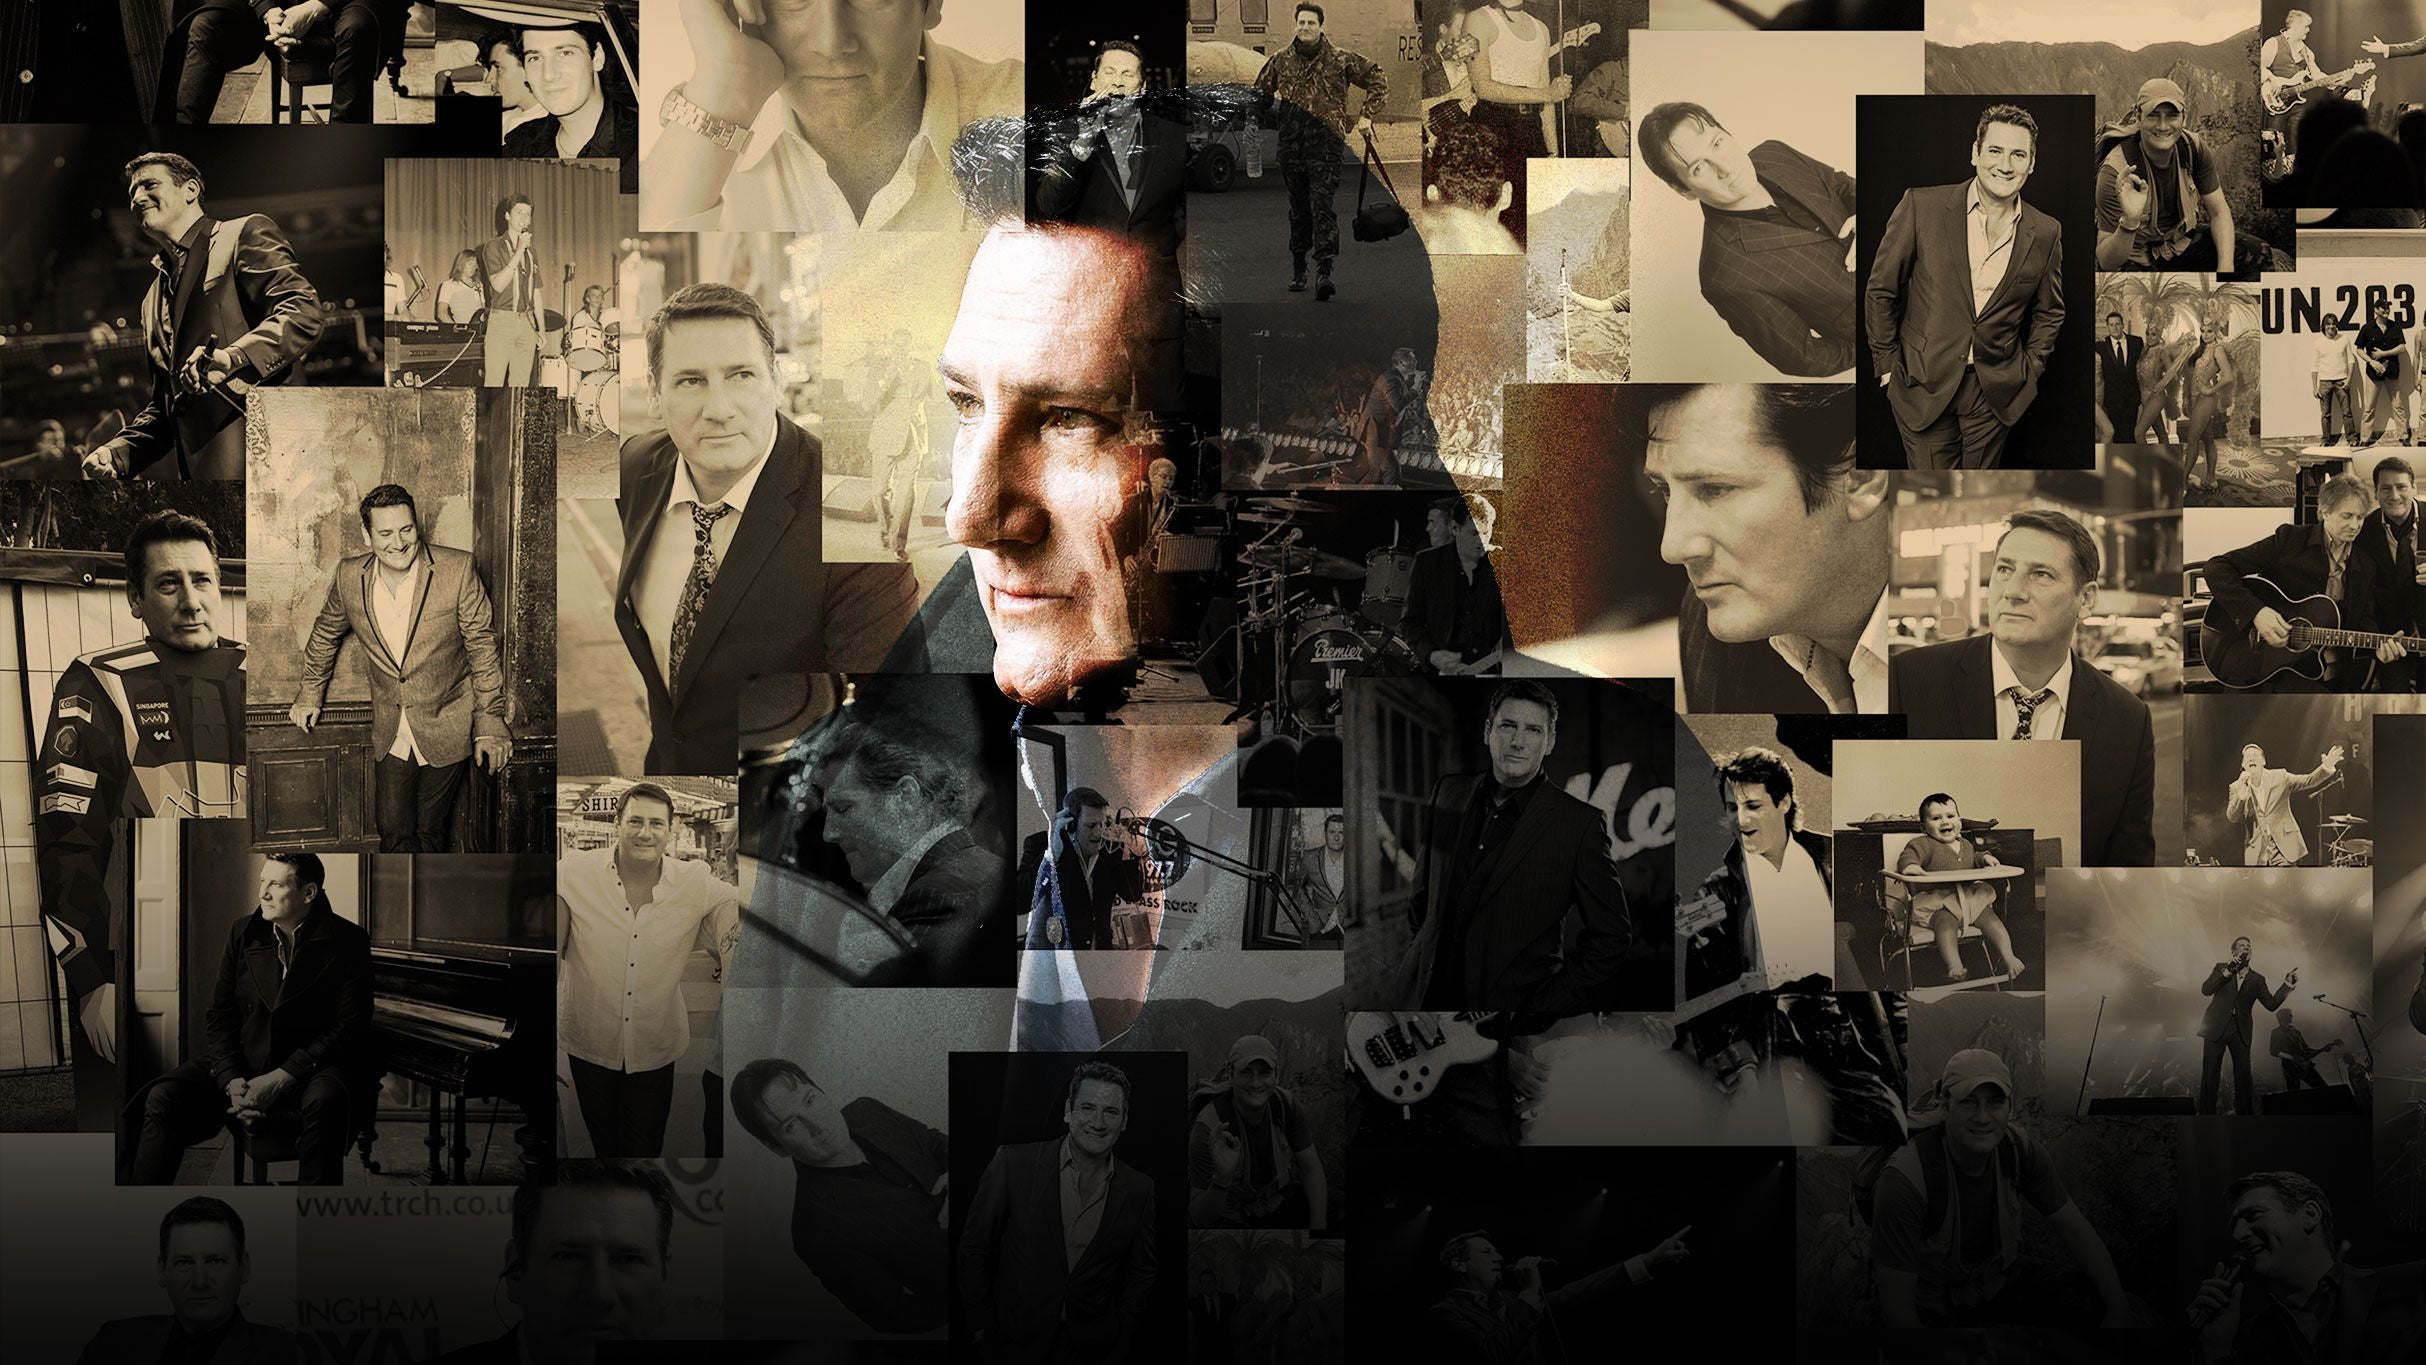 Image used with permission from Ticketmaster | Tony Hadley - 40th Anniversary Tour tickets